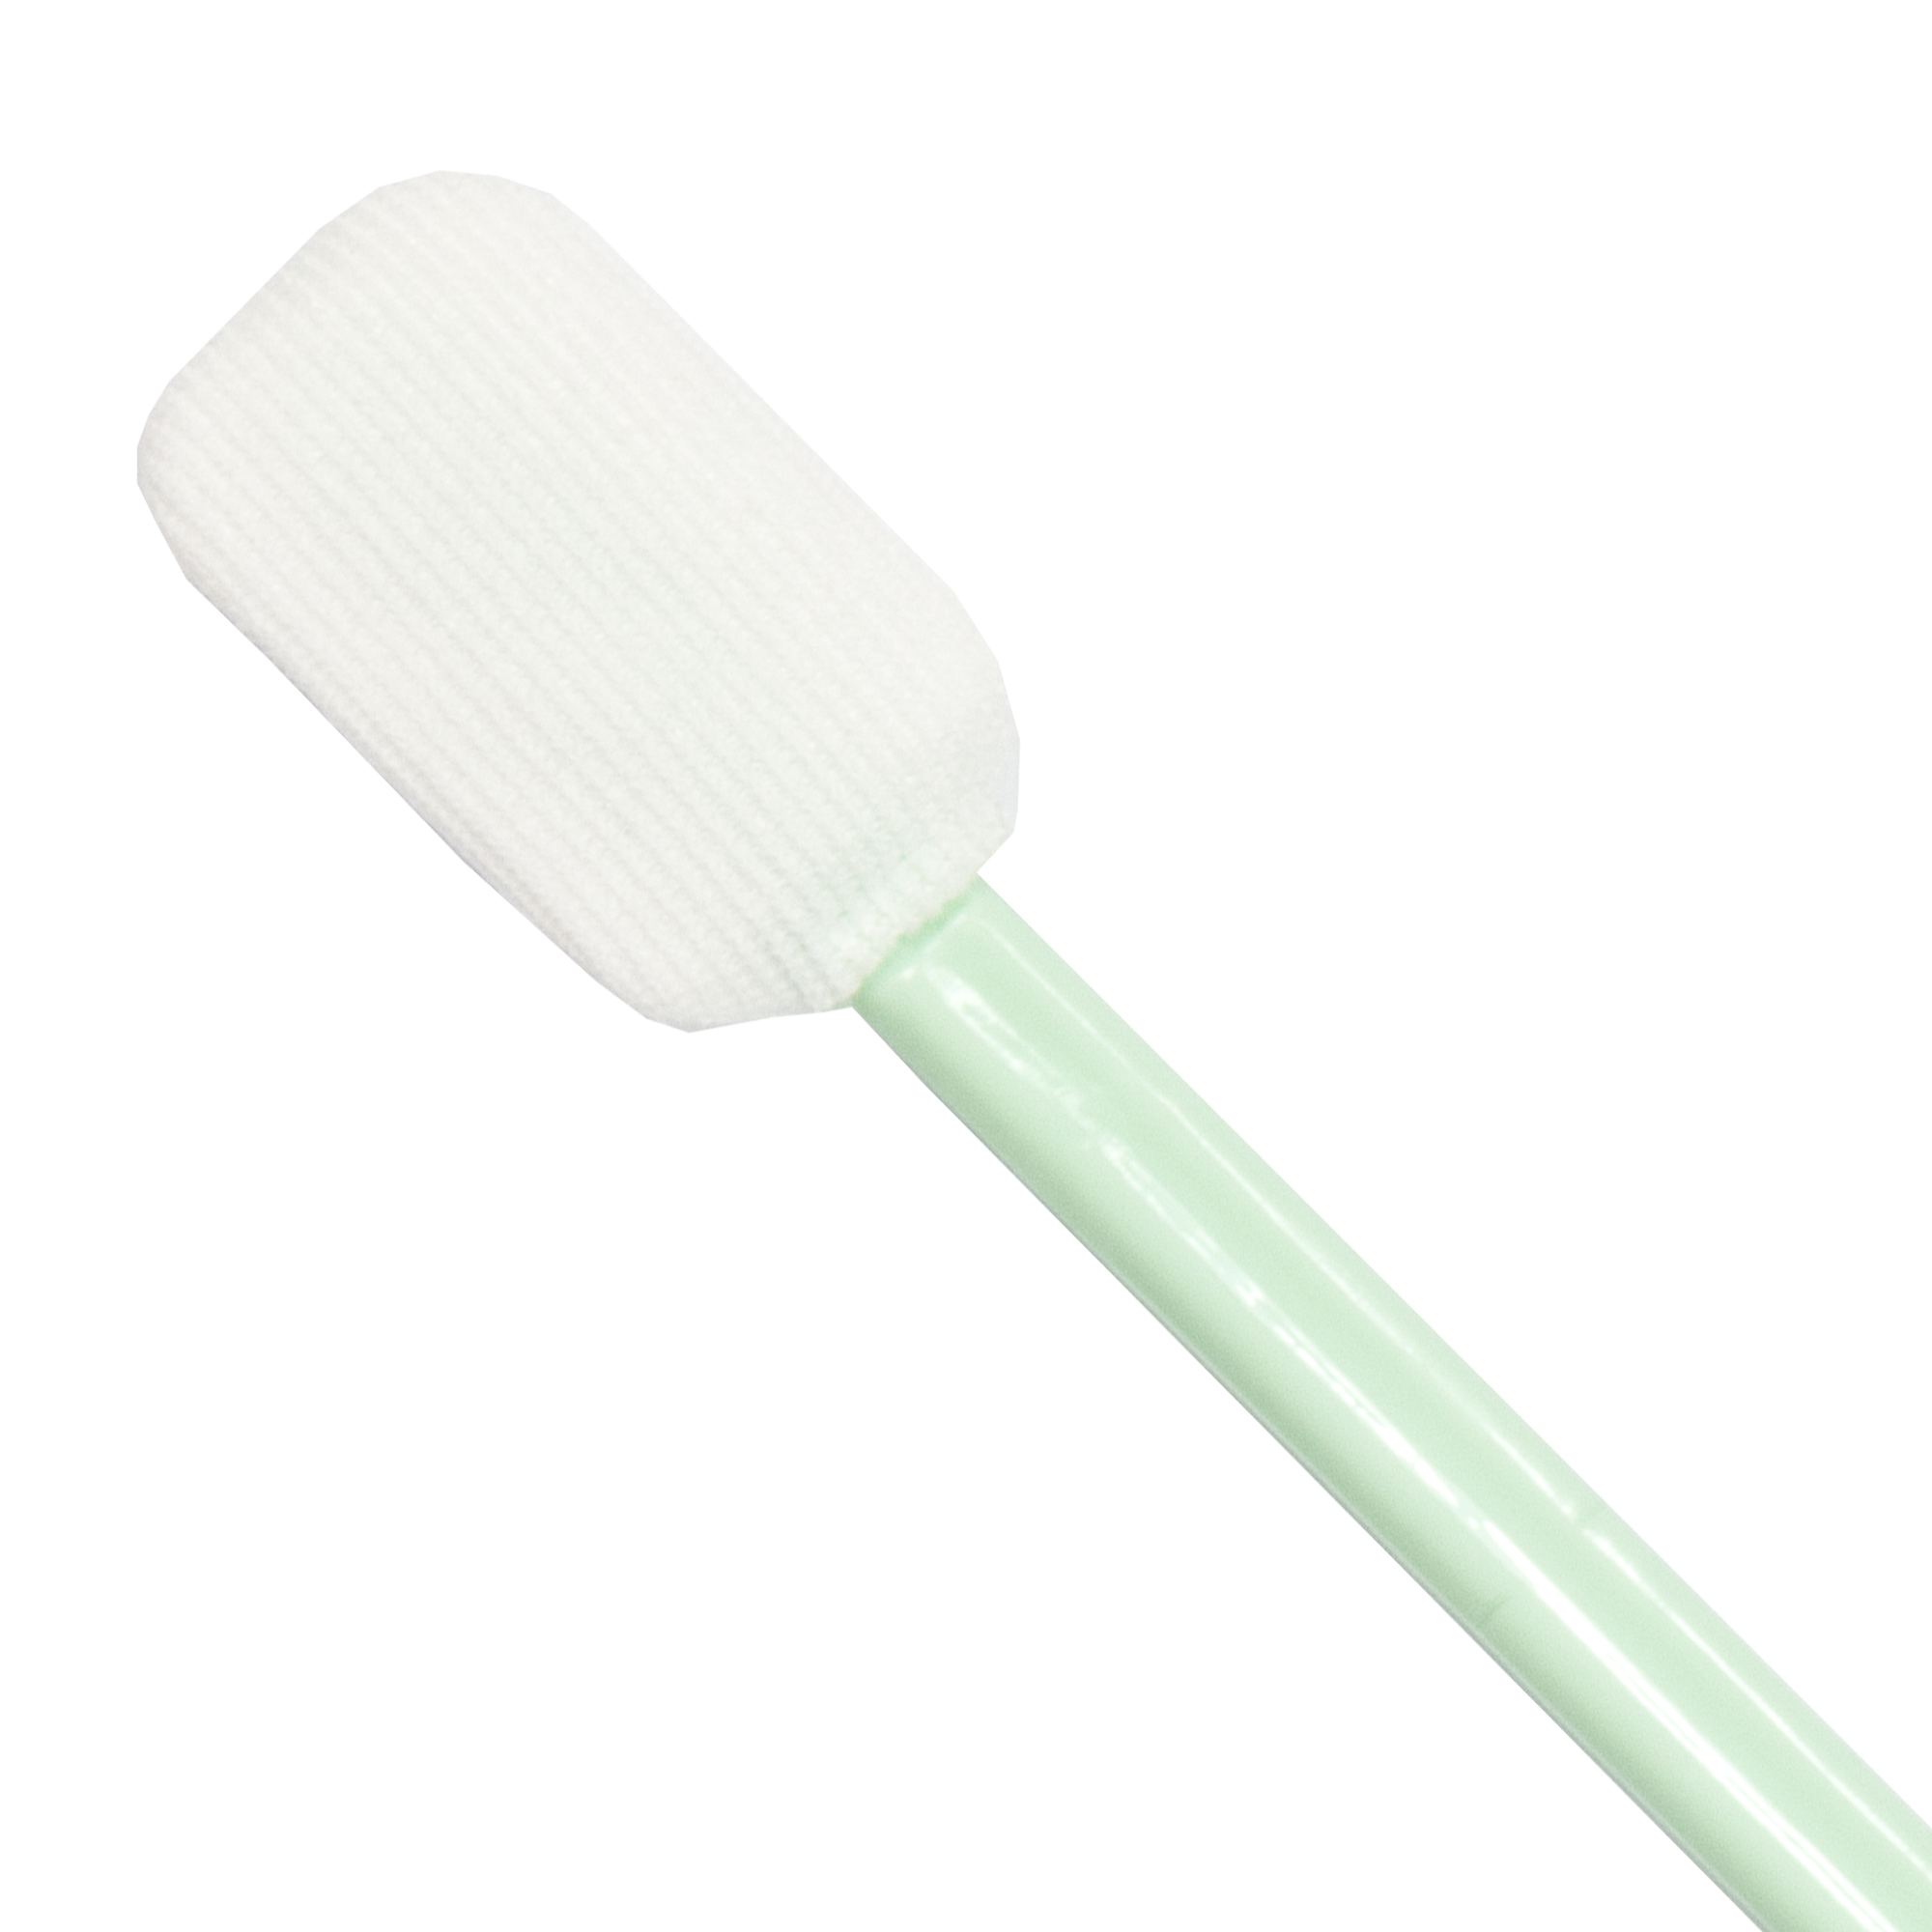 Cleaning Stick/Swab PS3911